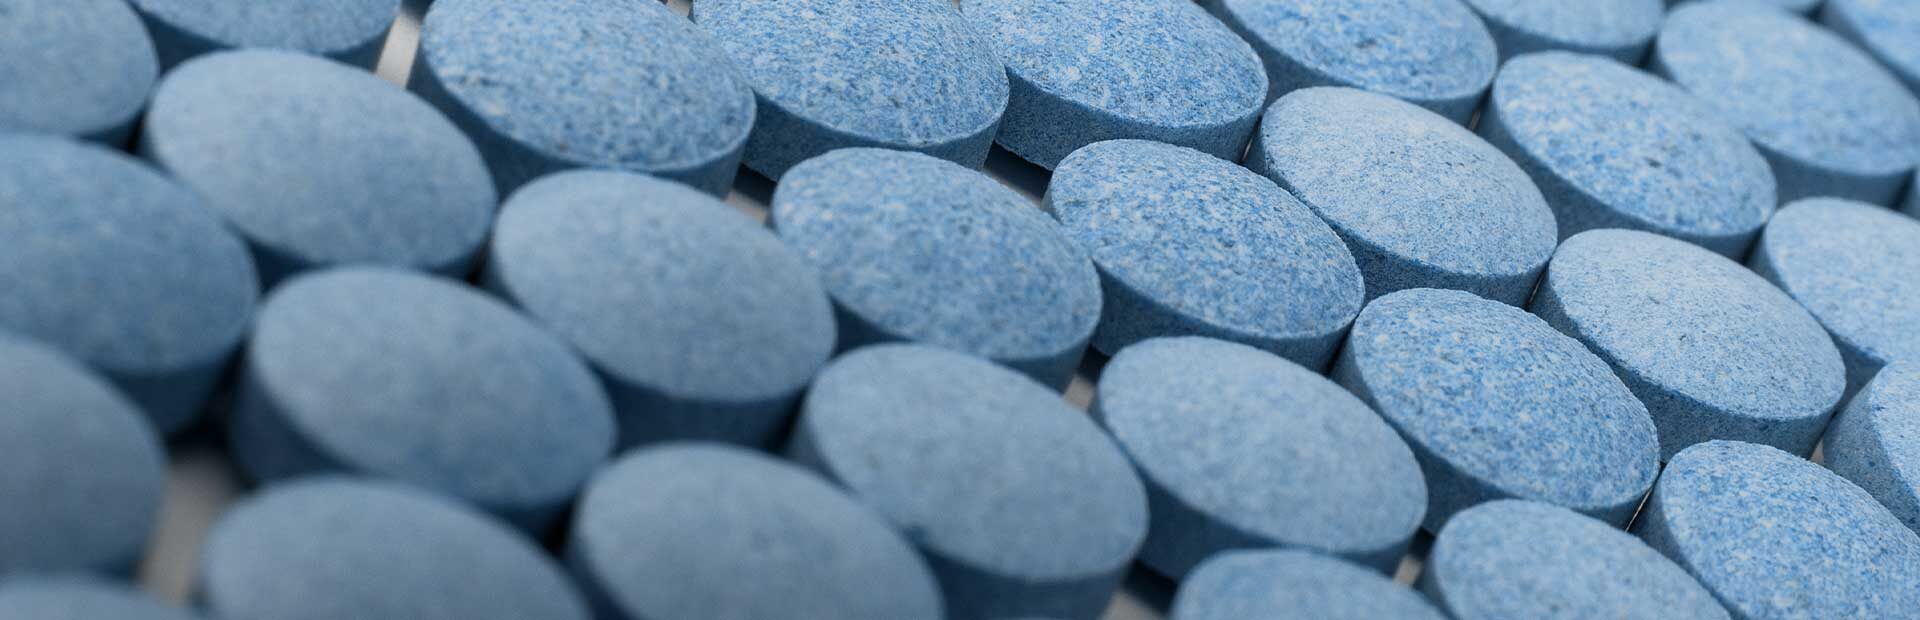 Close up of many small round blue pills